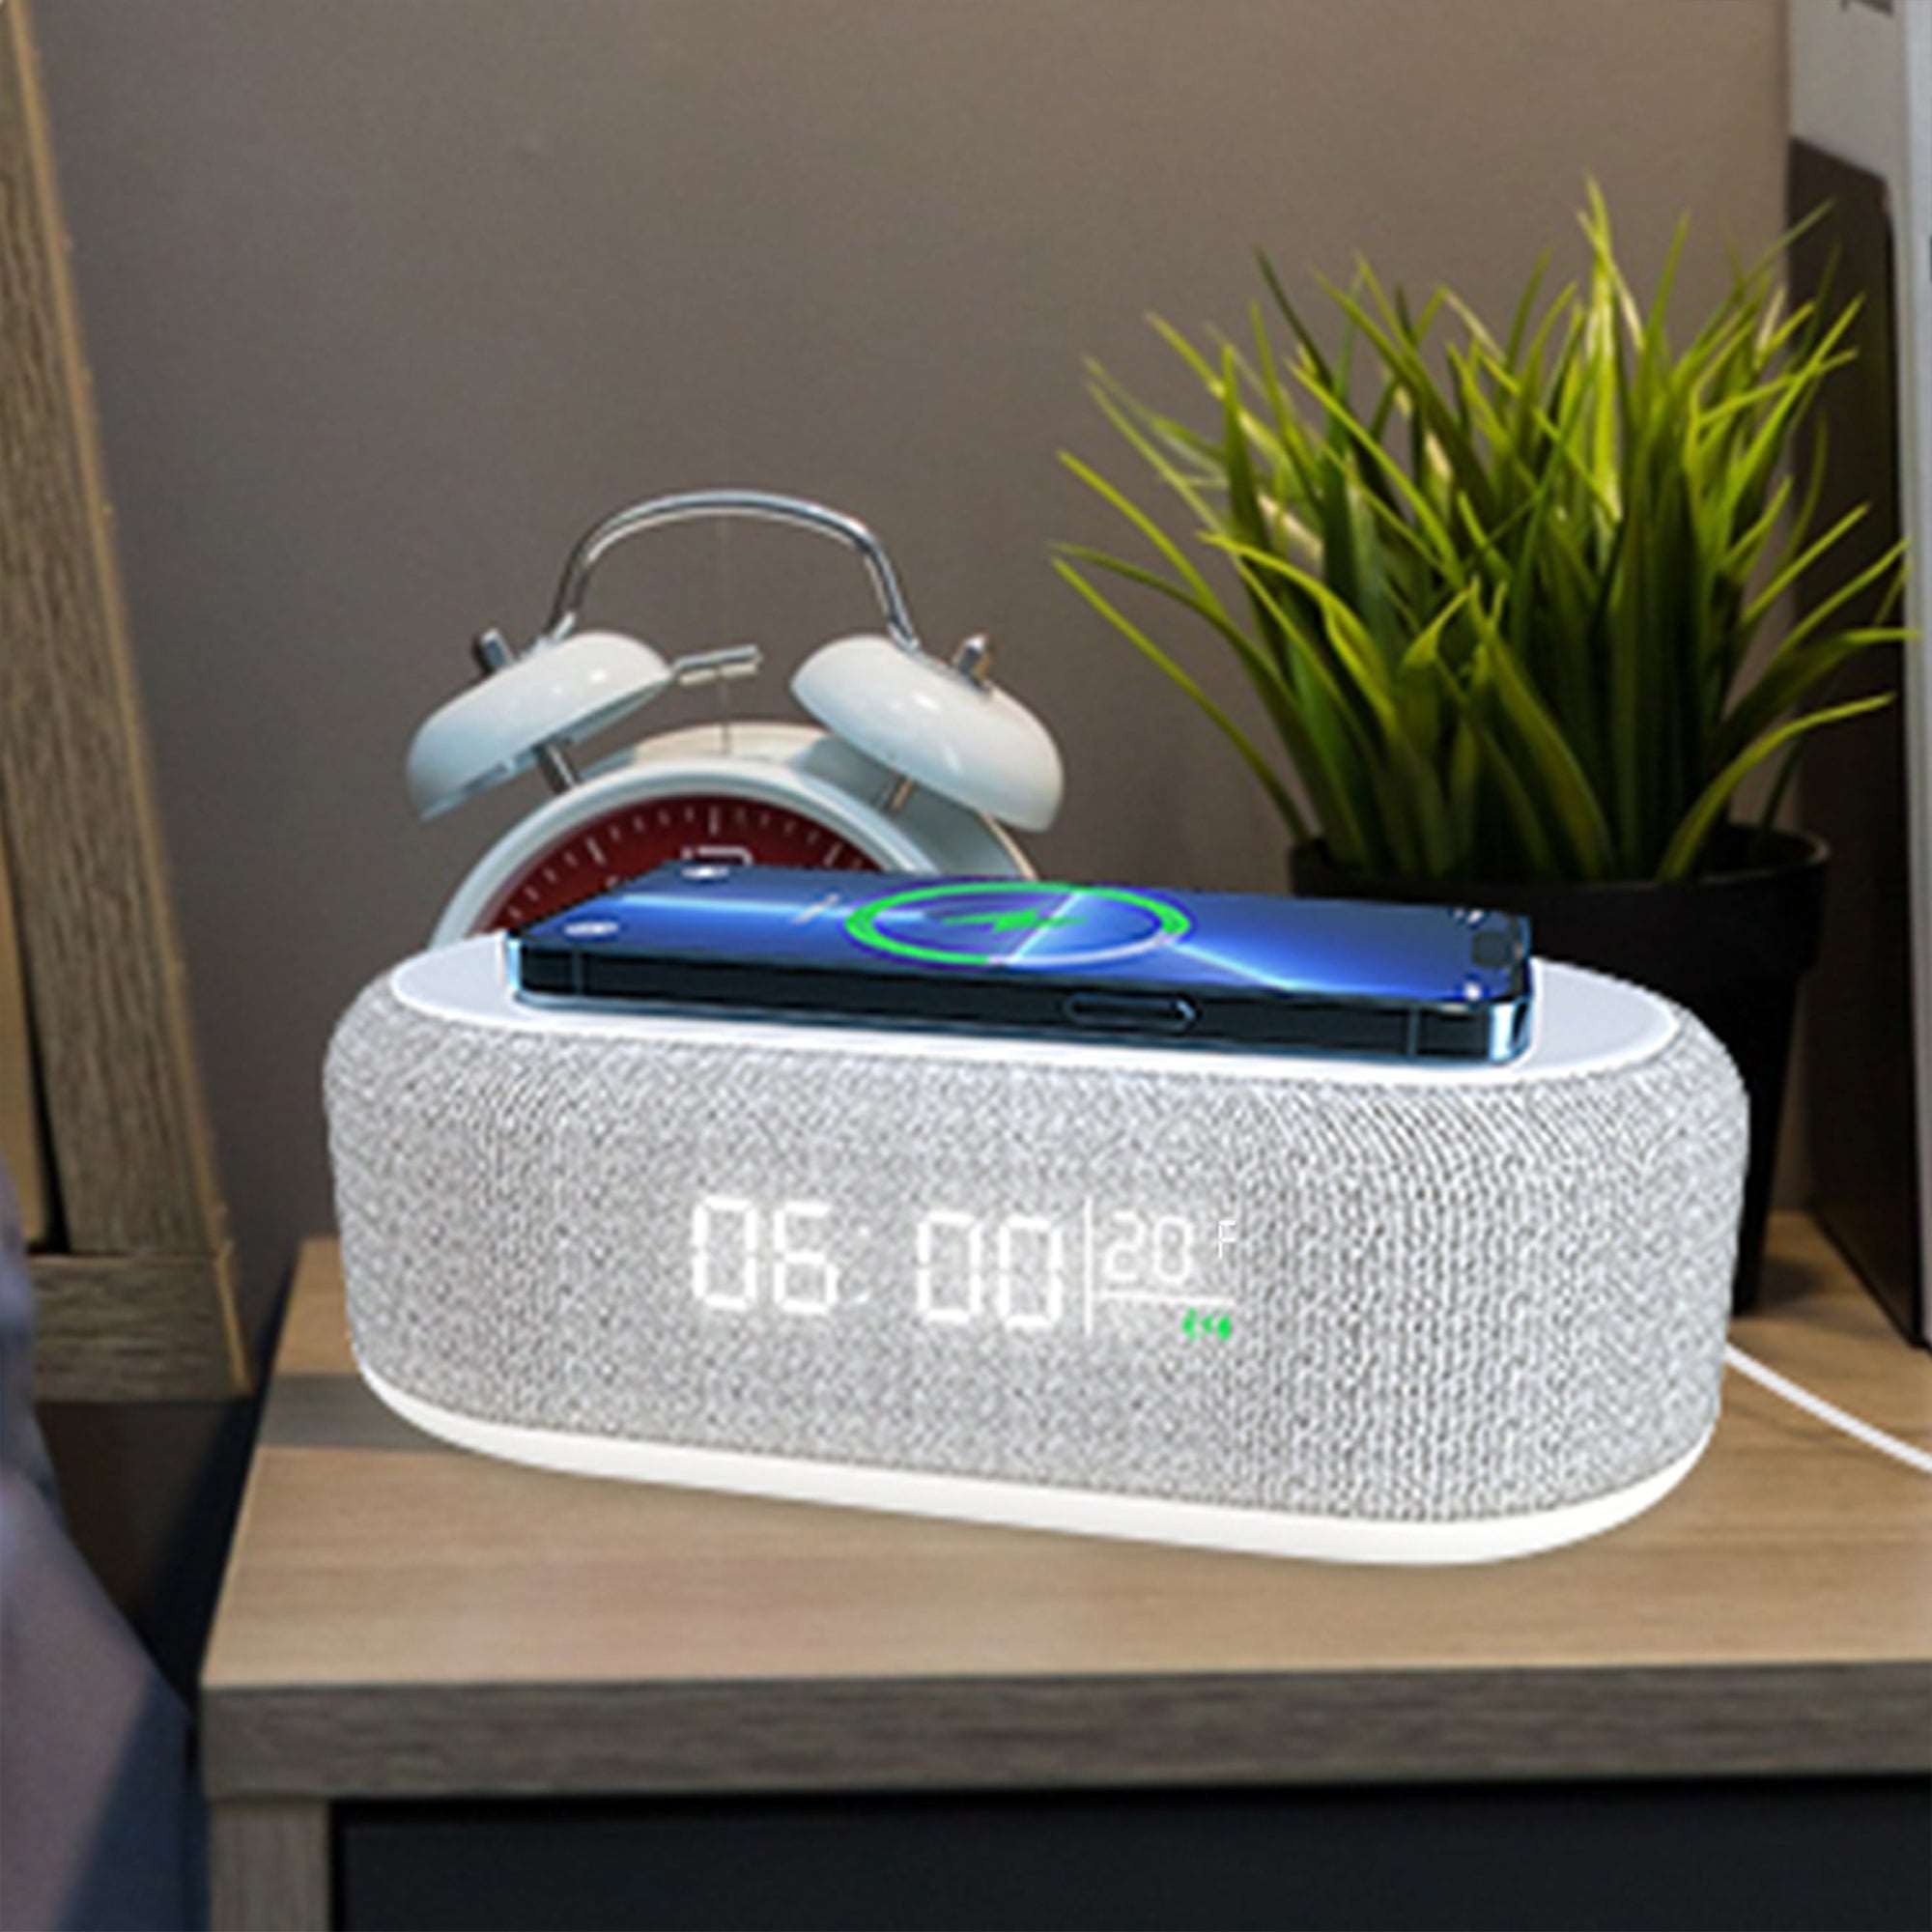 Nfin8 Sync 3-in-1 Alarm Clock with Wireless Charging Station